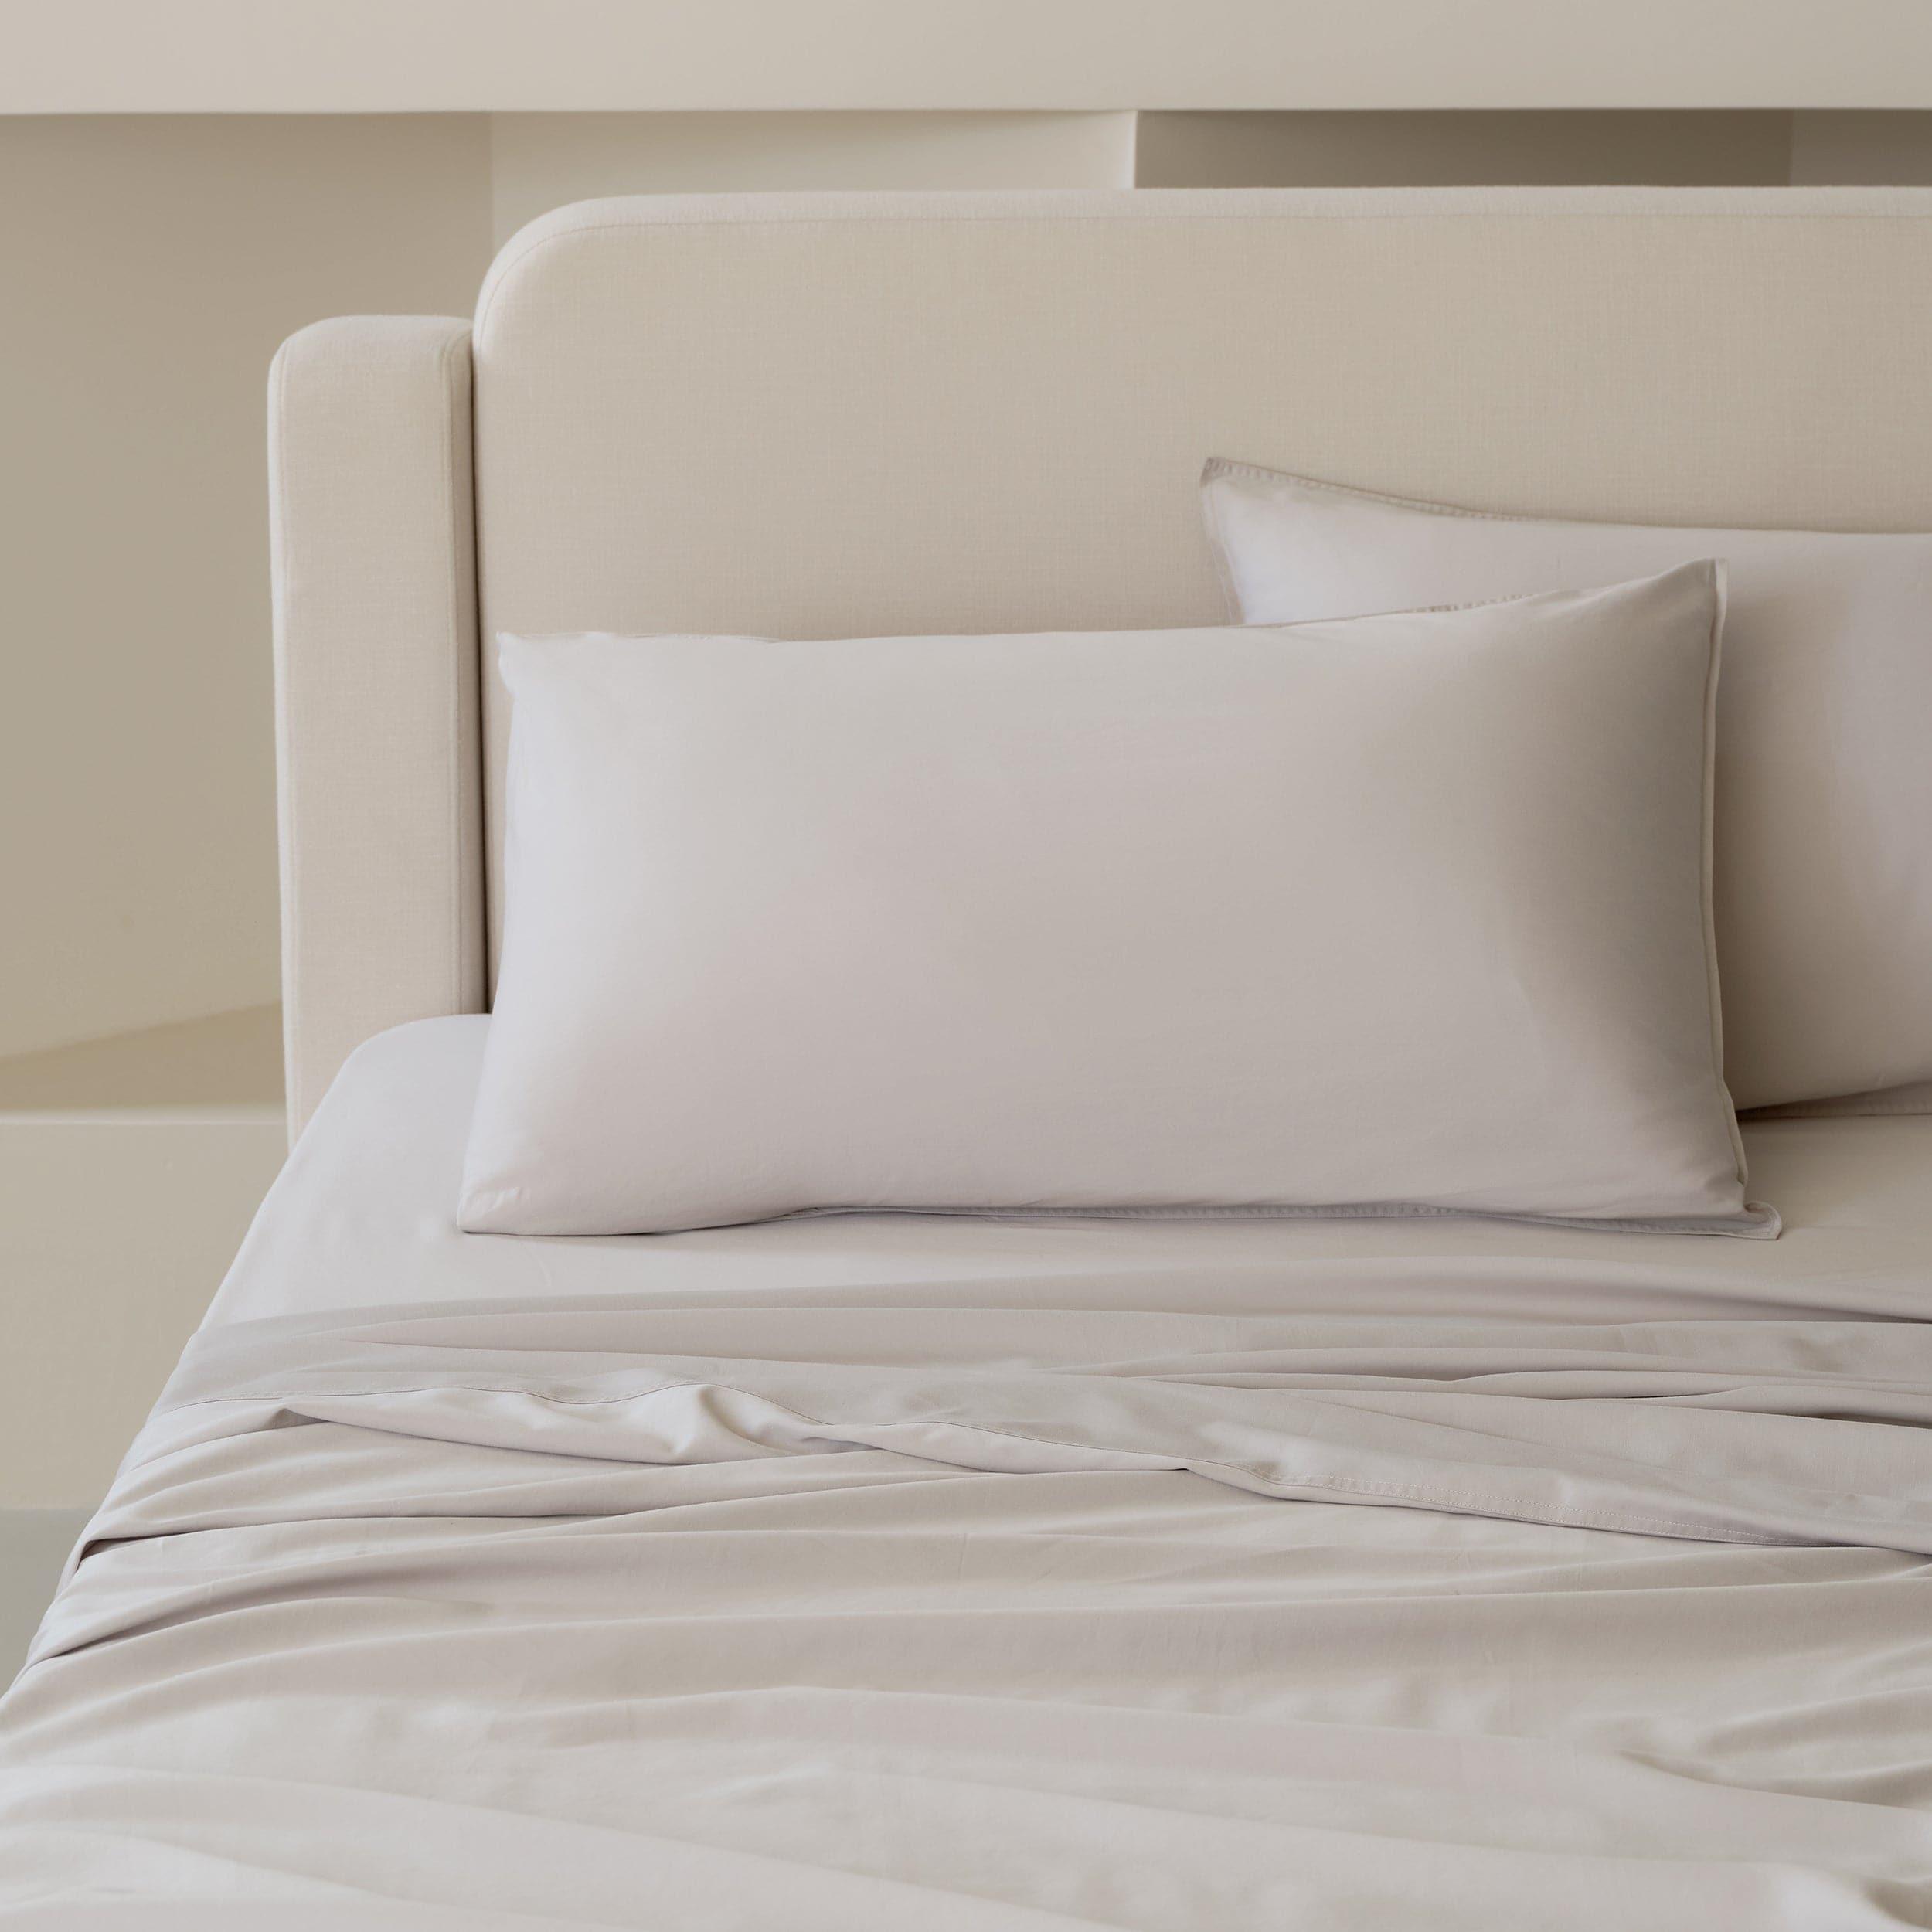 Add a touch of elegance to your bedroom decor with a premium king size bed sheet set.